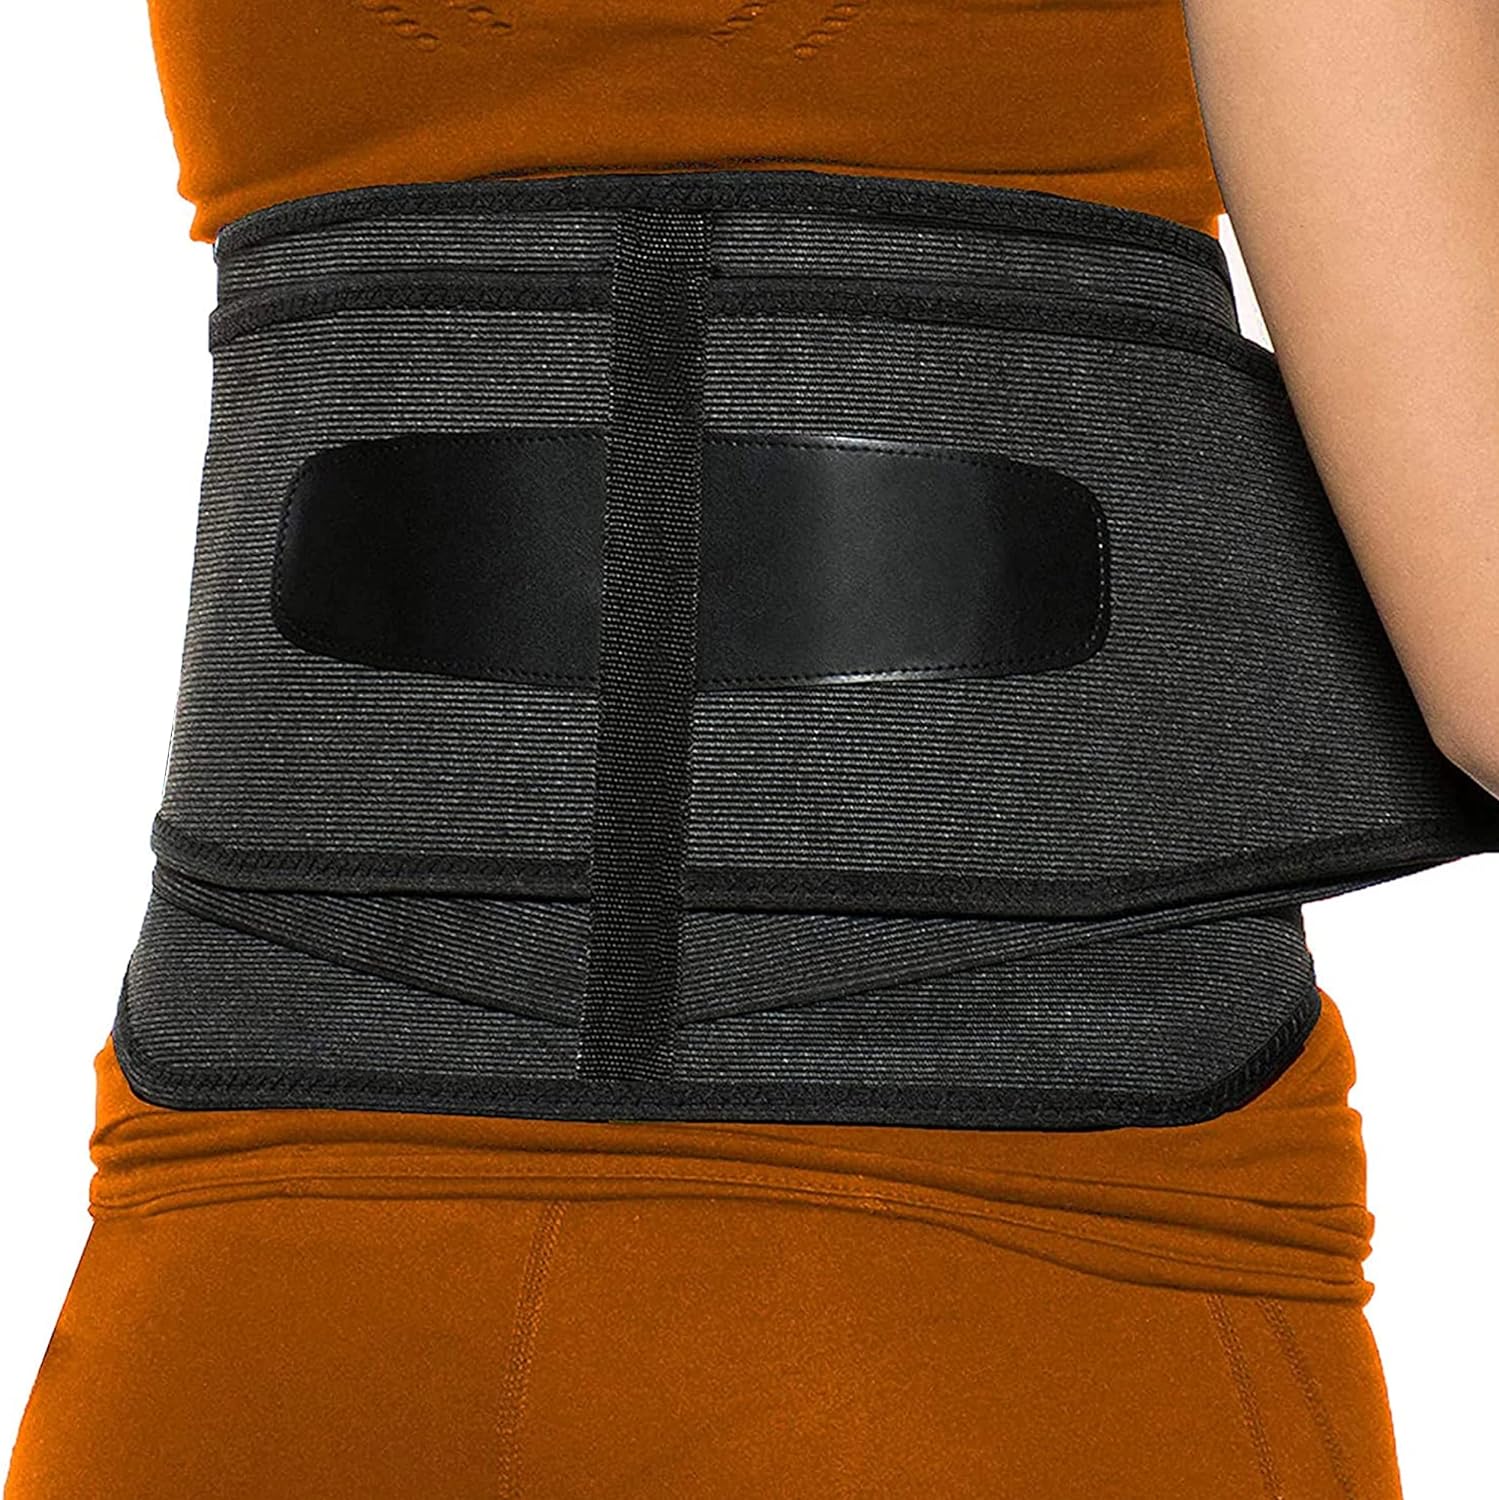 Generic MODVEL Back Brace - Immediate Relief from Back Pain, Herniated Disc, Sciatica, Scoliosis | FSA or HSA eligible | Breathable Wai